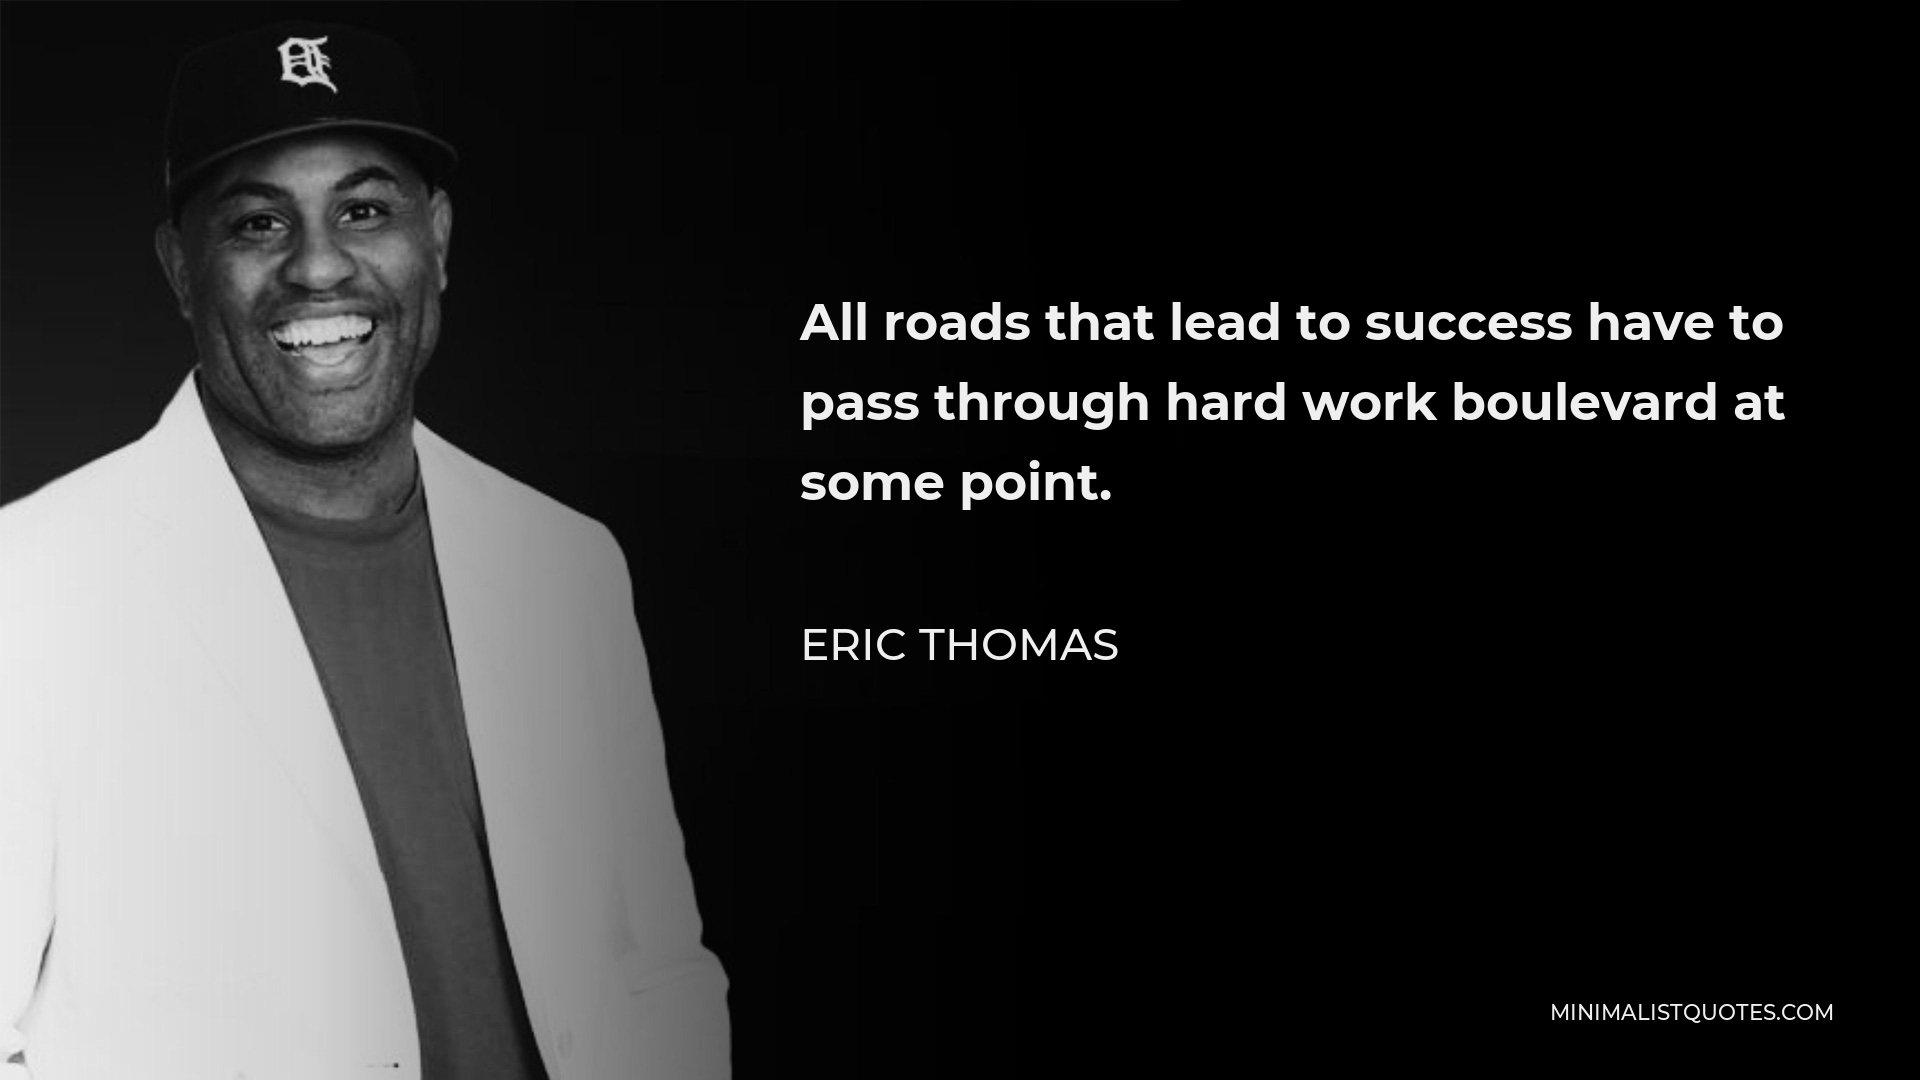 Eric Thomas Quote - All roads that lead to success have to pass through hard work boulevard at some point.